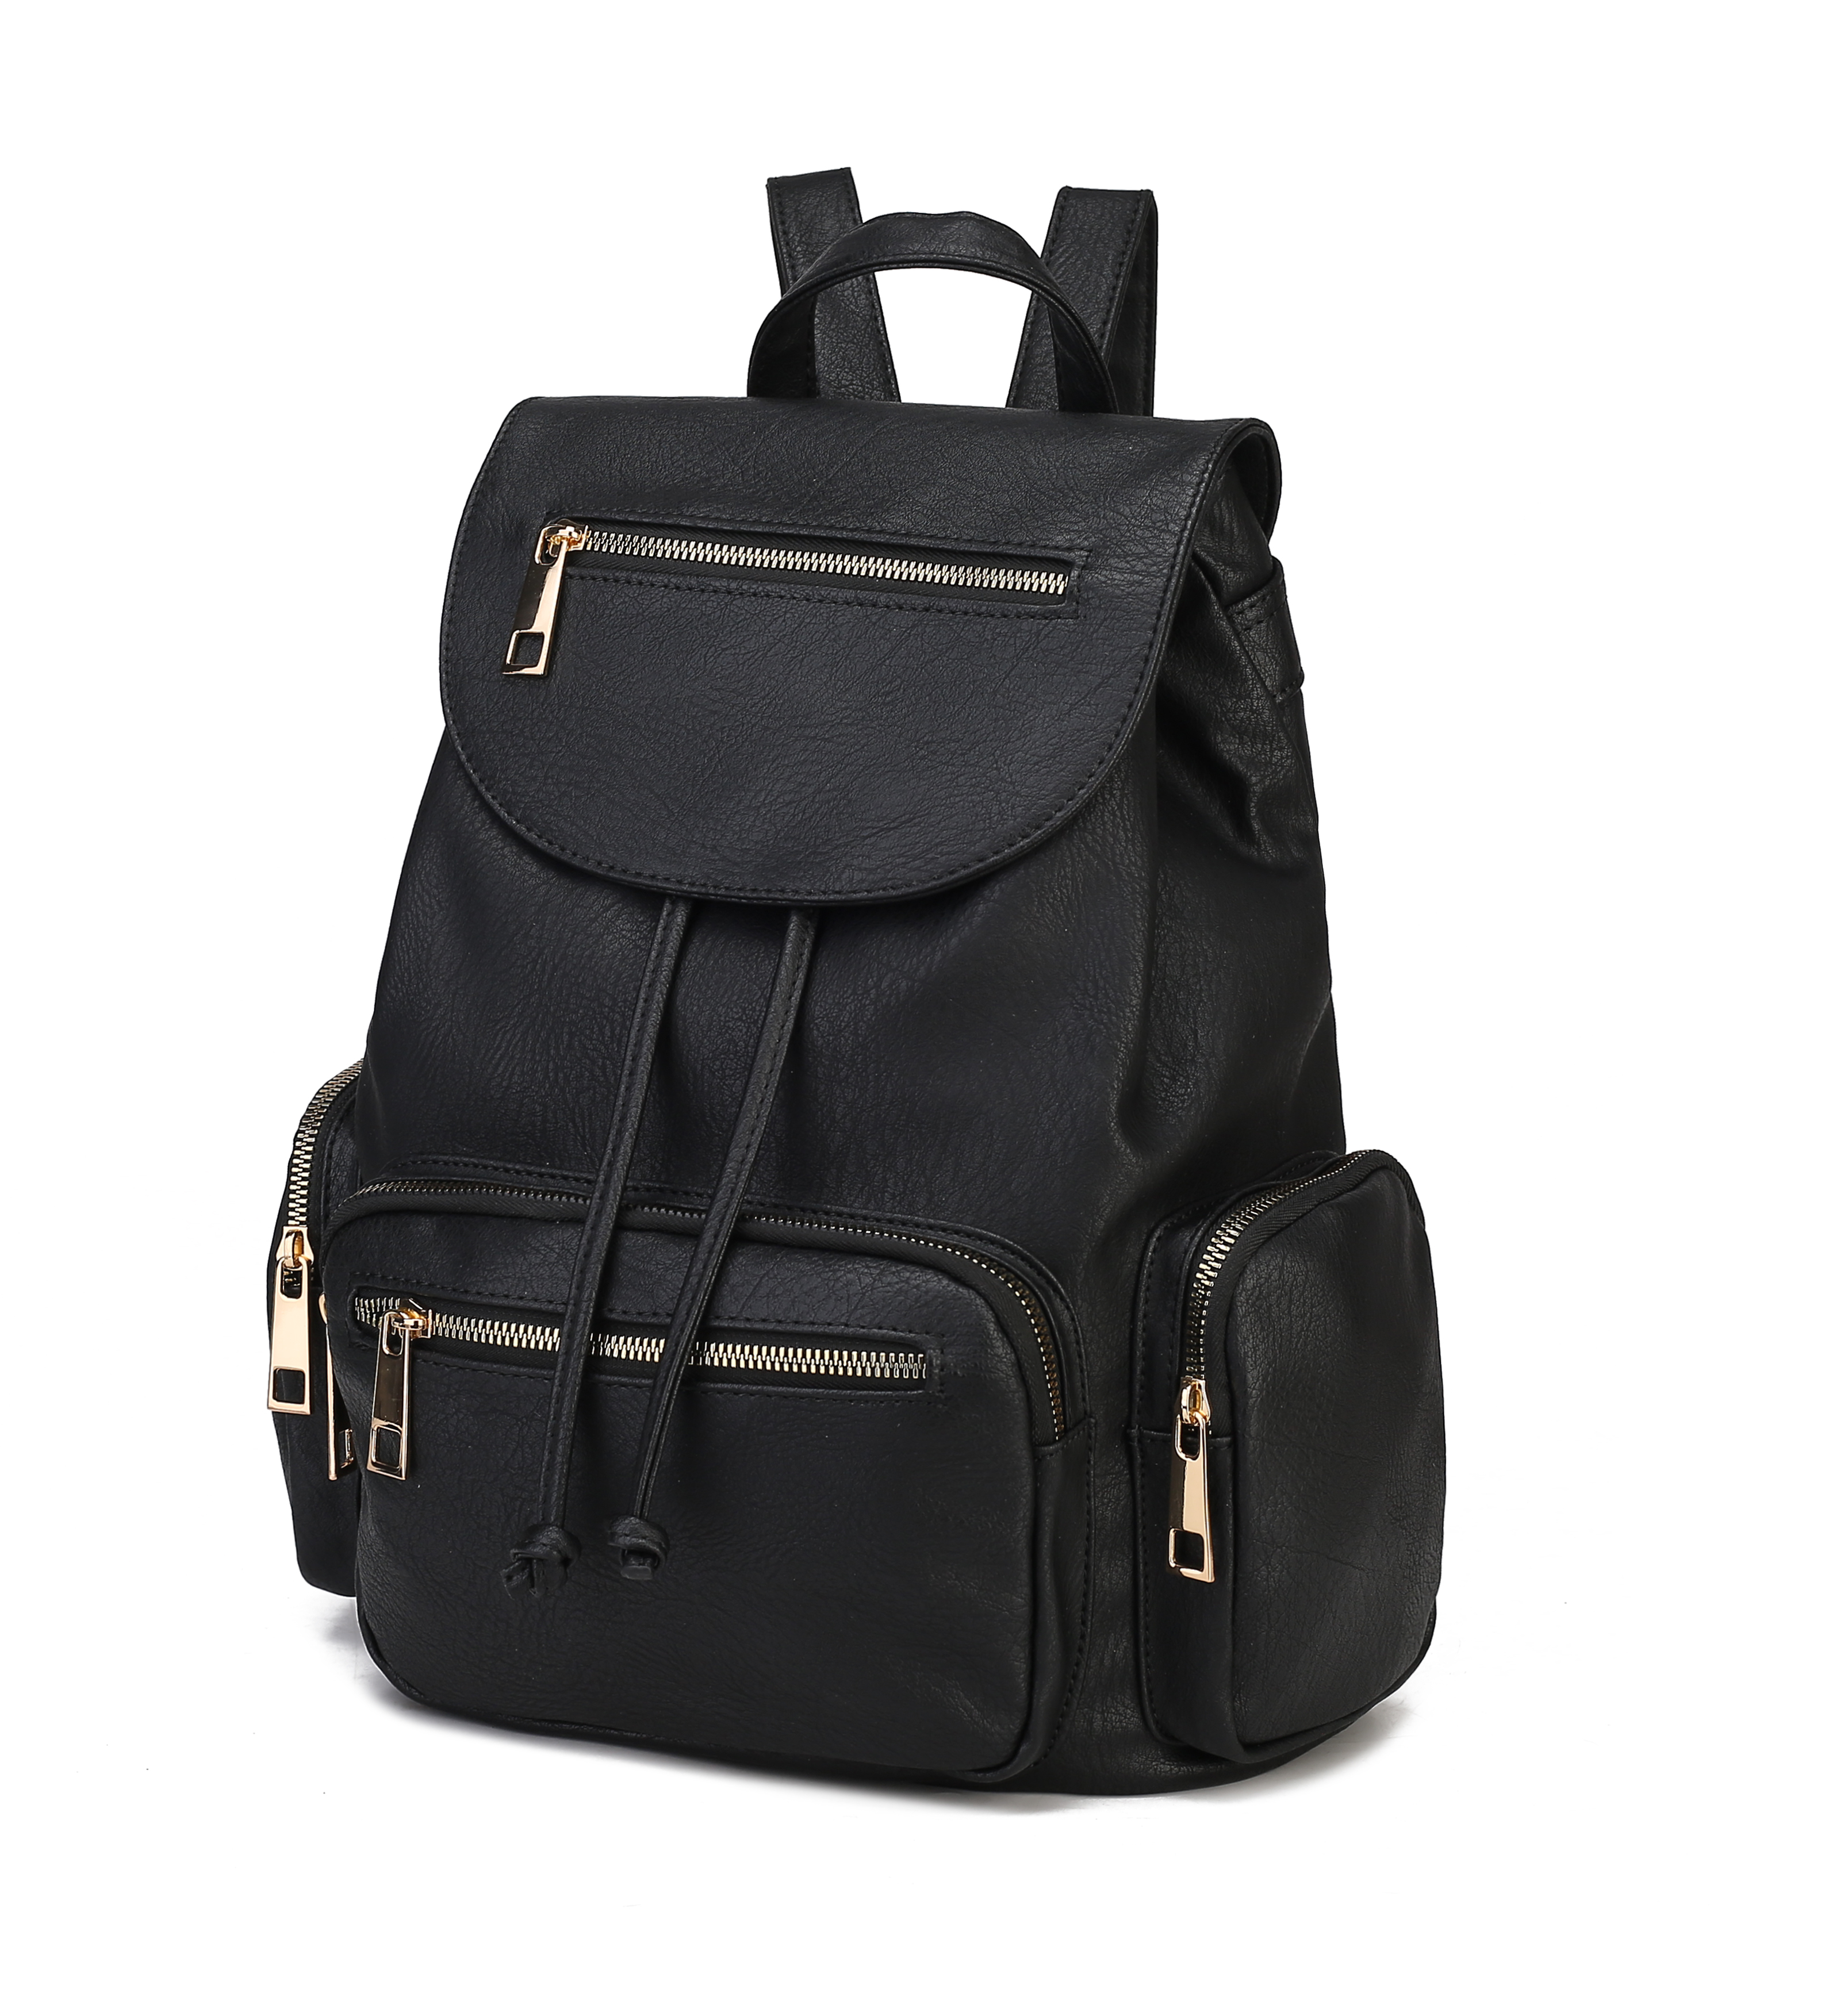 MKF Collection Caroline Backpack by Mia K. - image 1 of 3